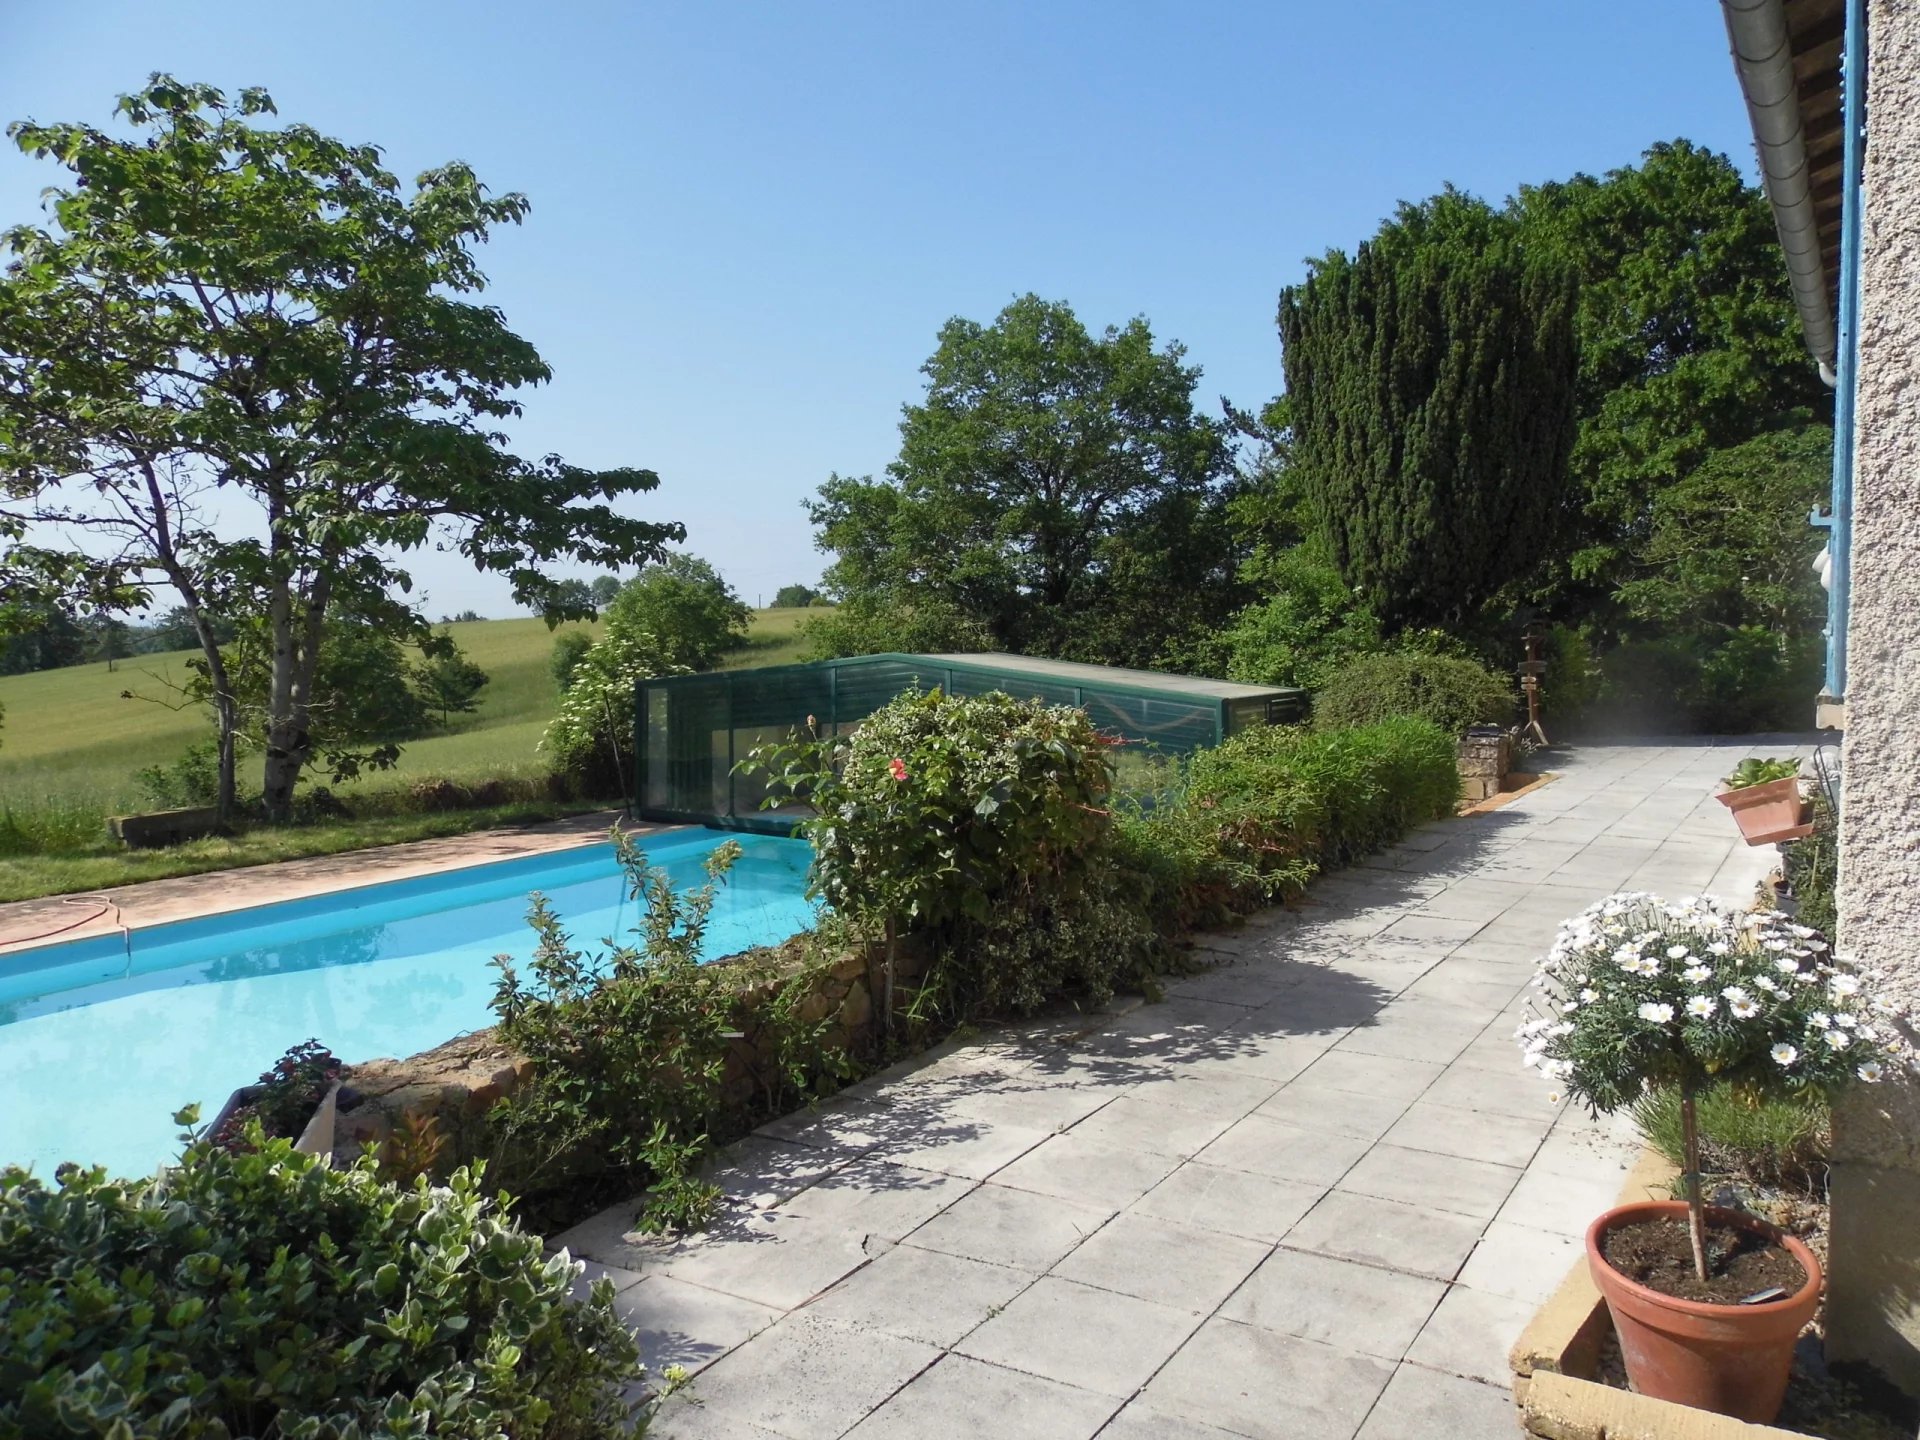 Modern 5-bed bungalow, near to shops, lovely views, stunning pool